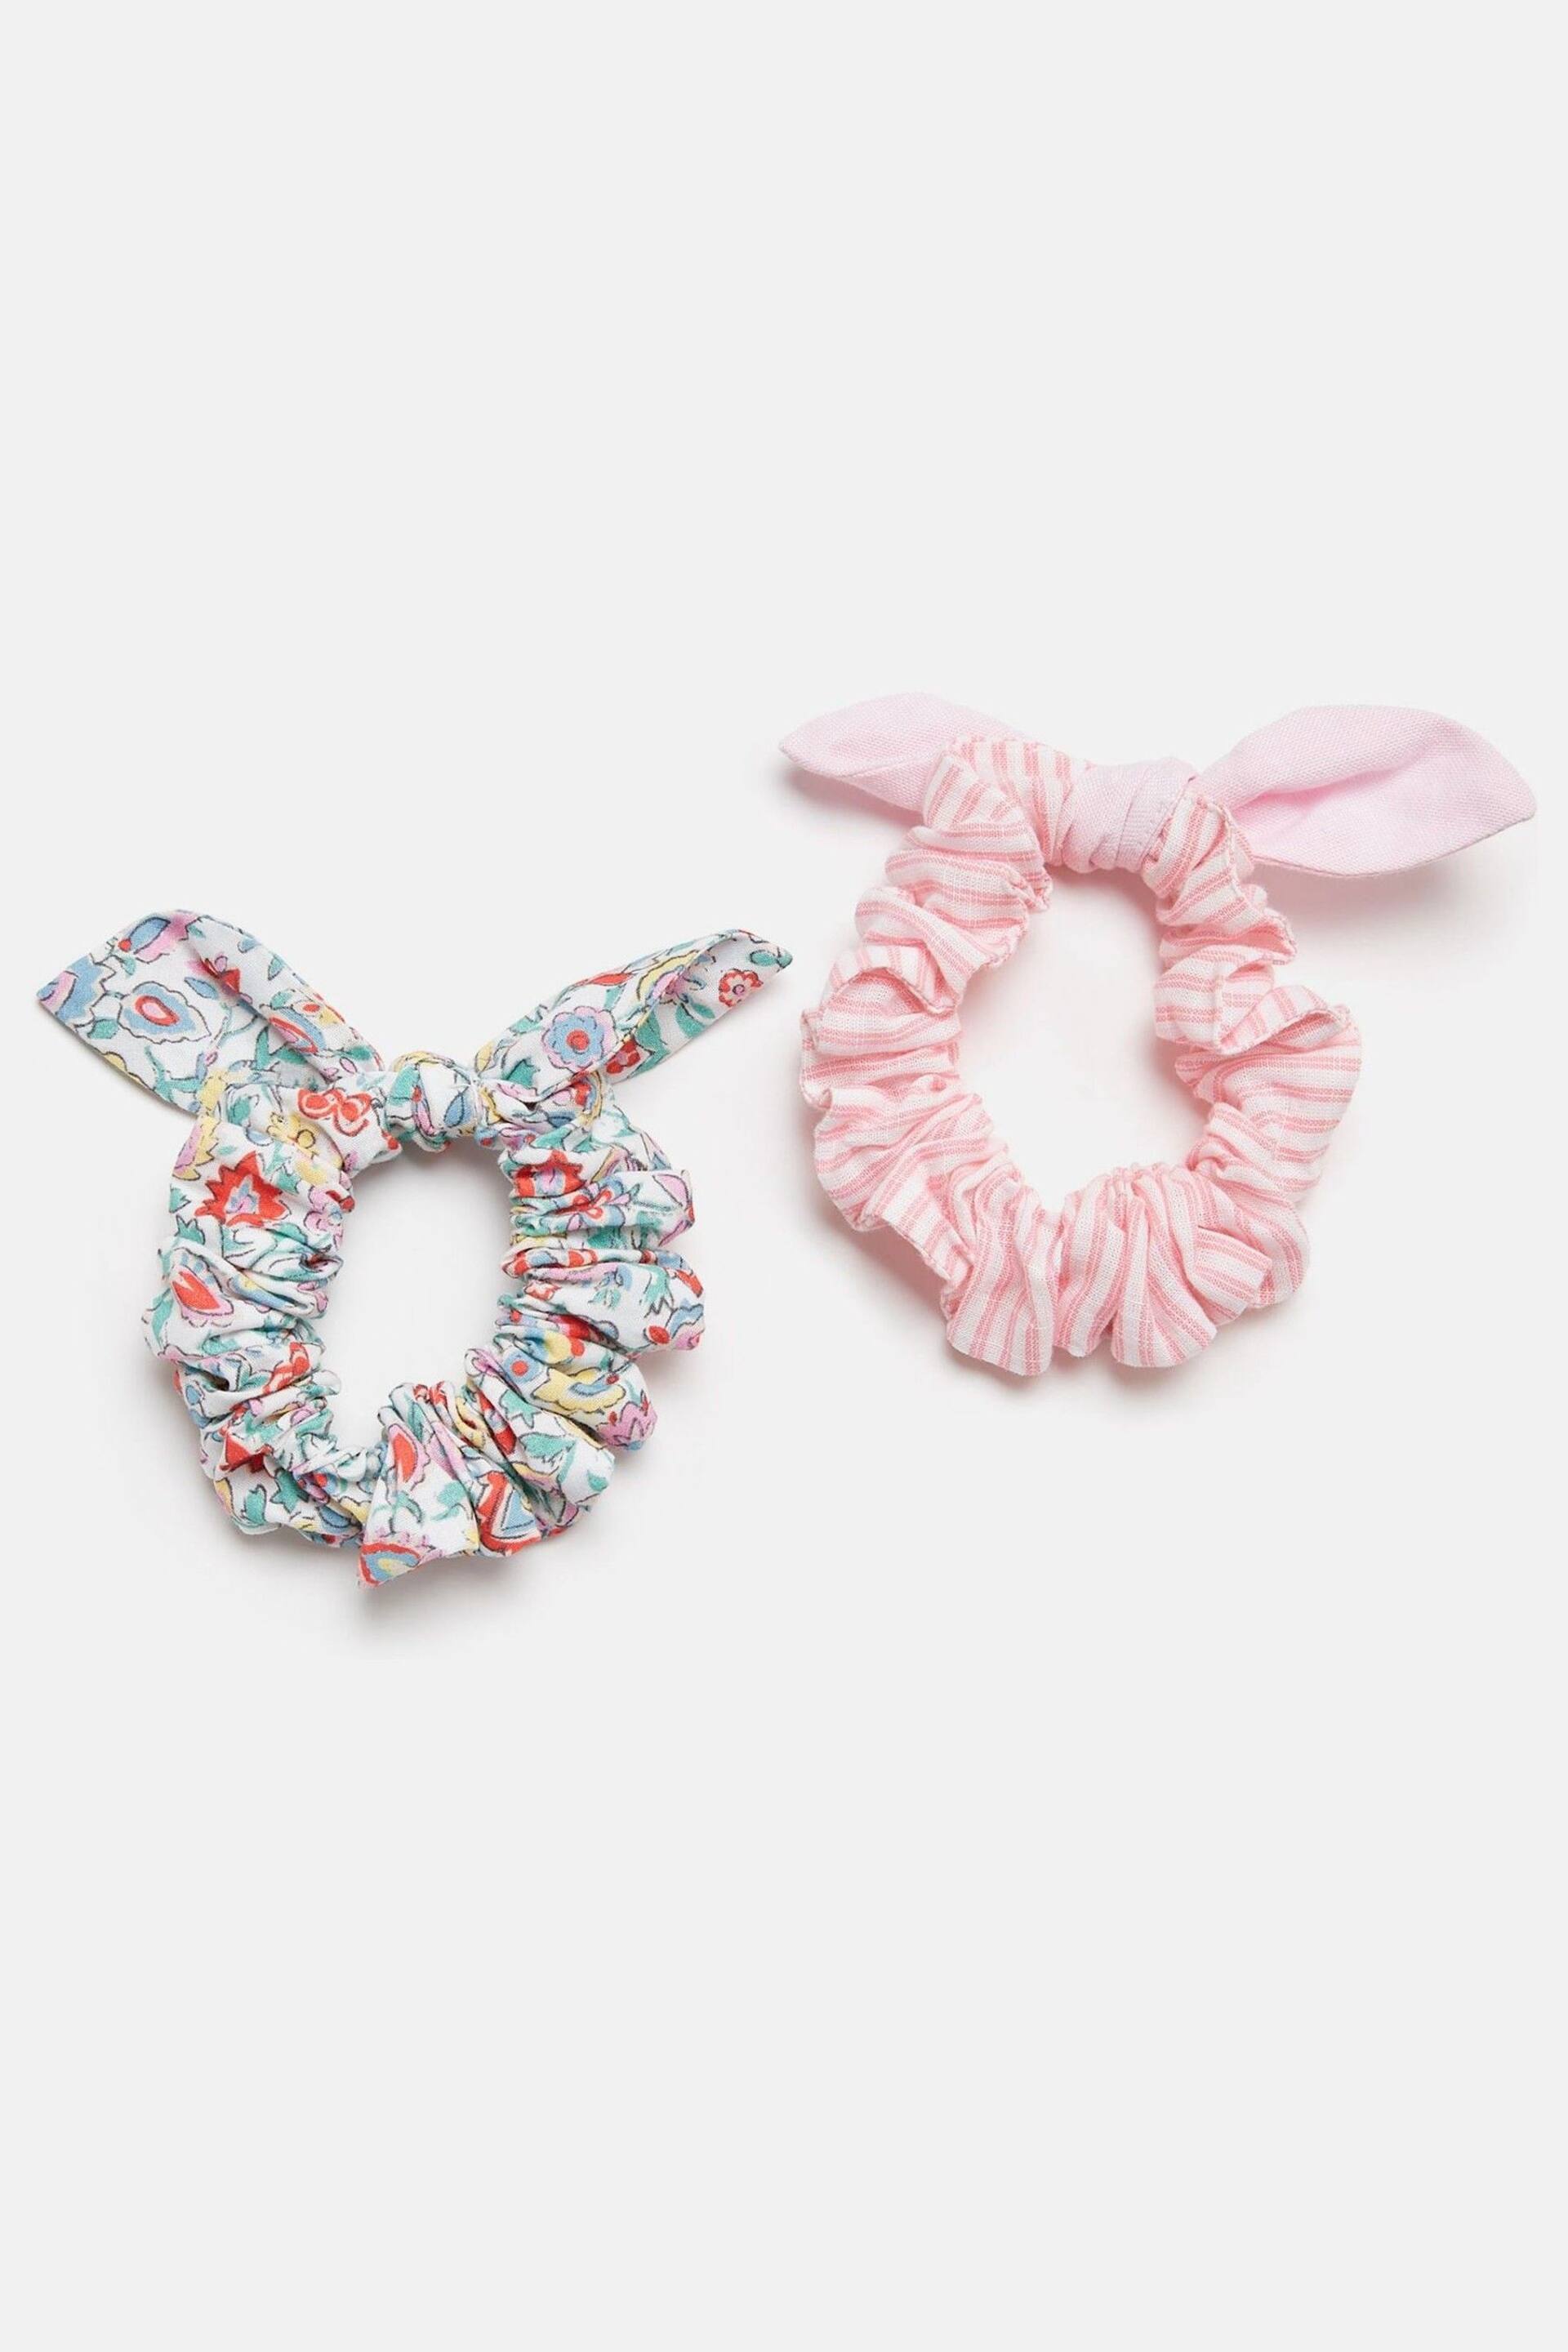 Joules Marina Pink Pack of Two Scrunchies - Image 1 of 2